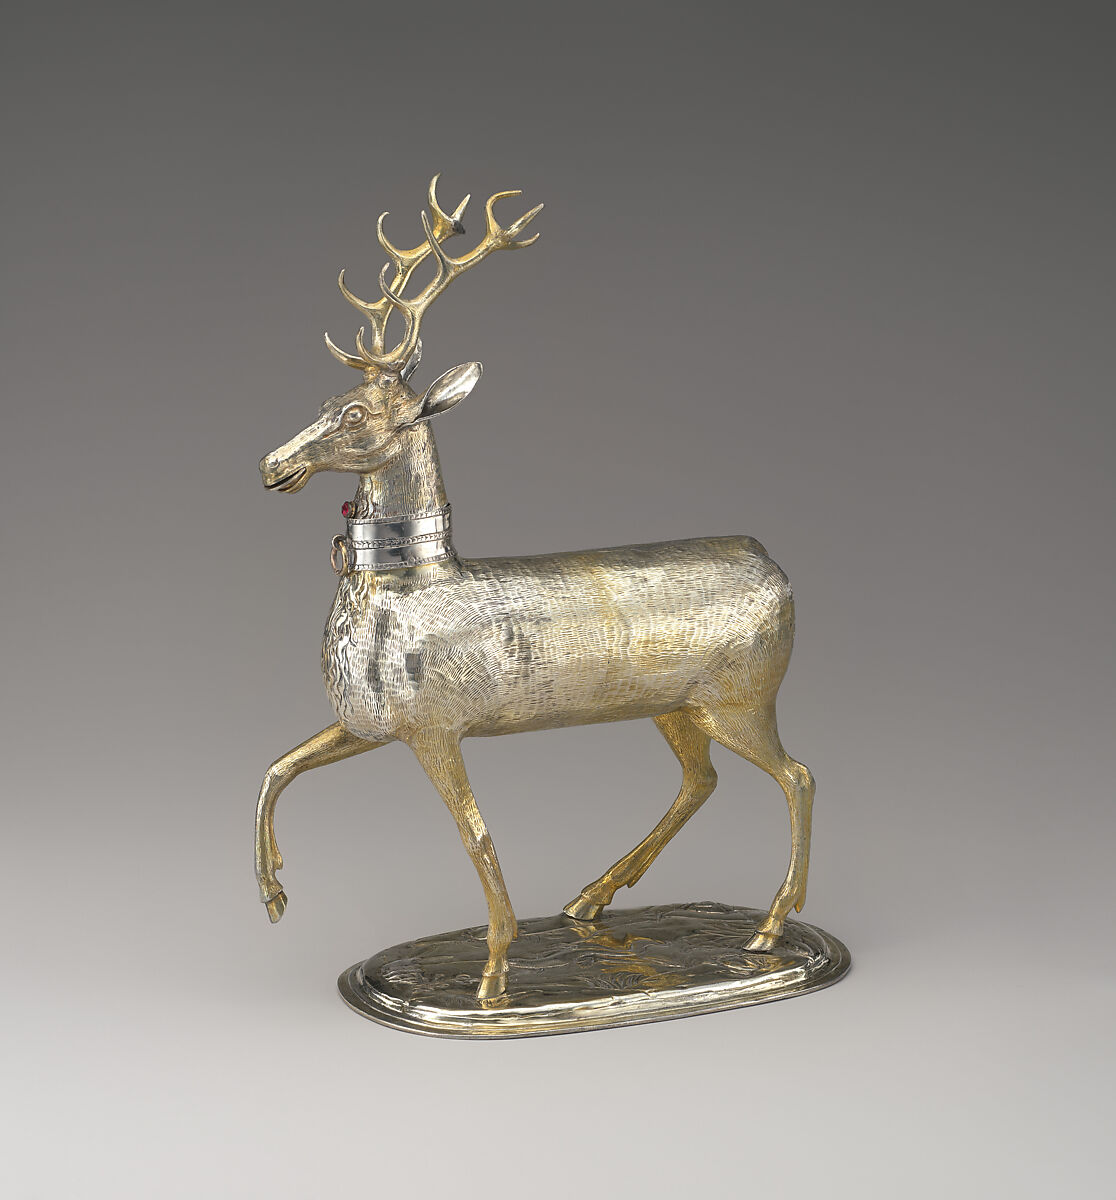 Cup in the form of a stag, Christoph Beham (master 1572, died 1610), Partly gilded silver, gemstone, German, Augsburg 